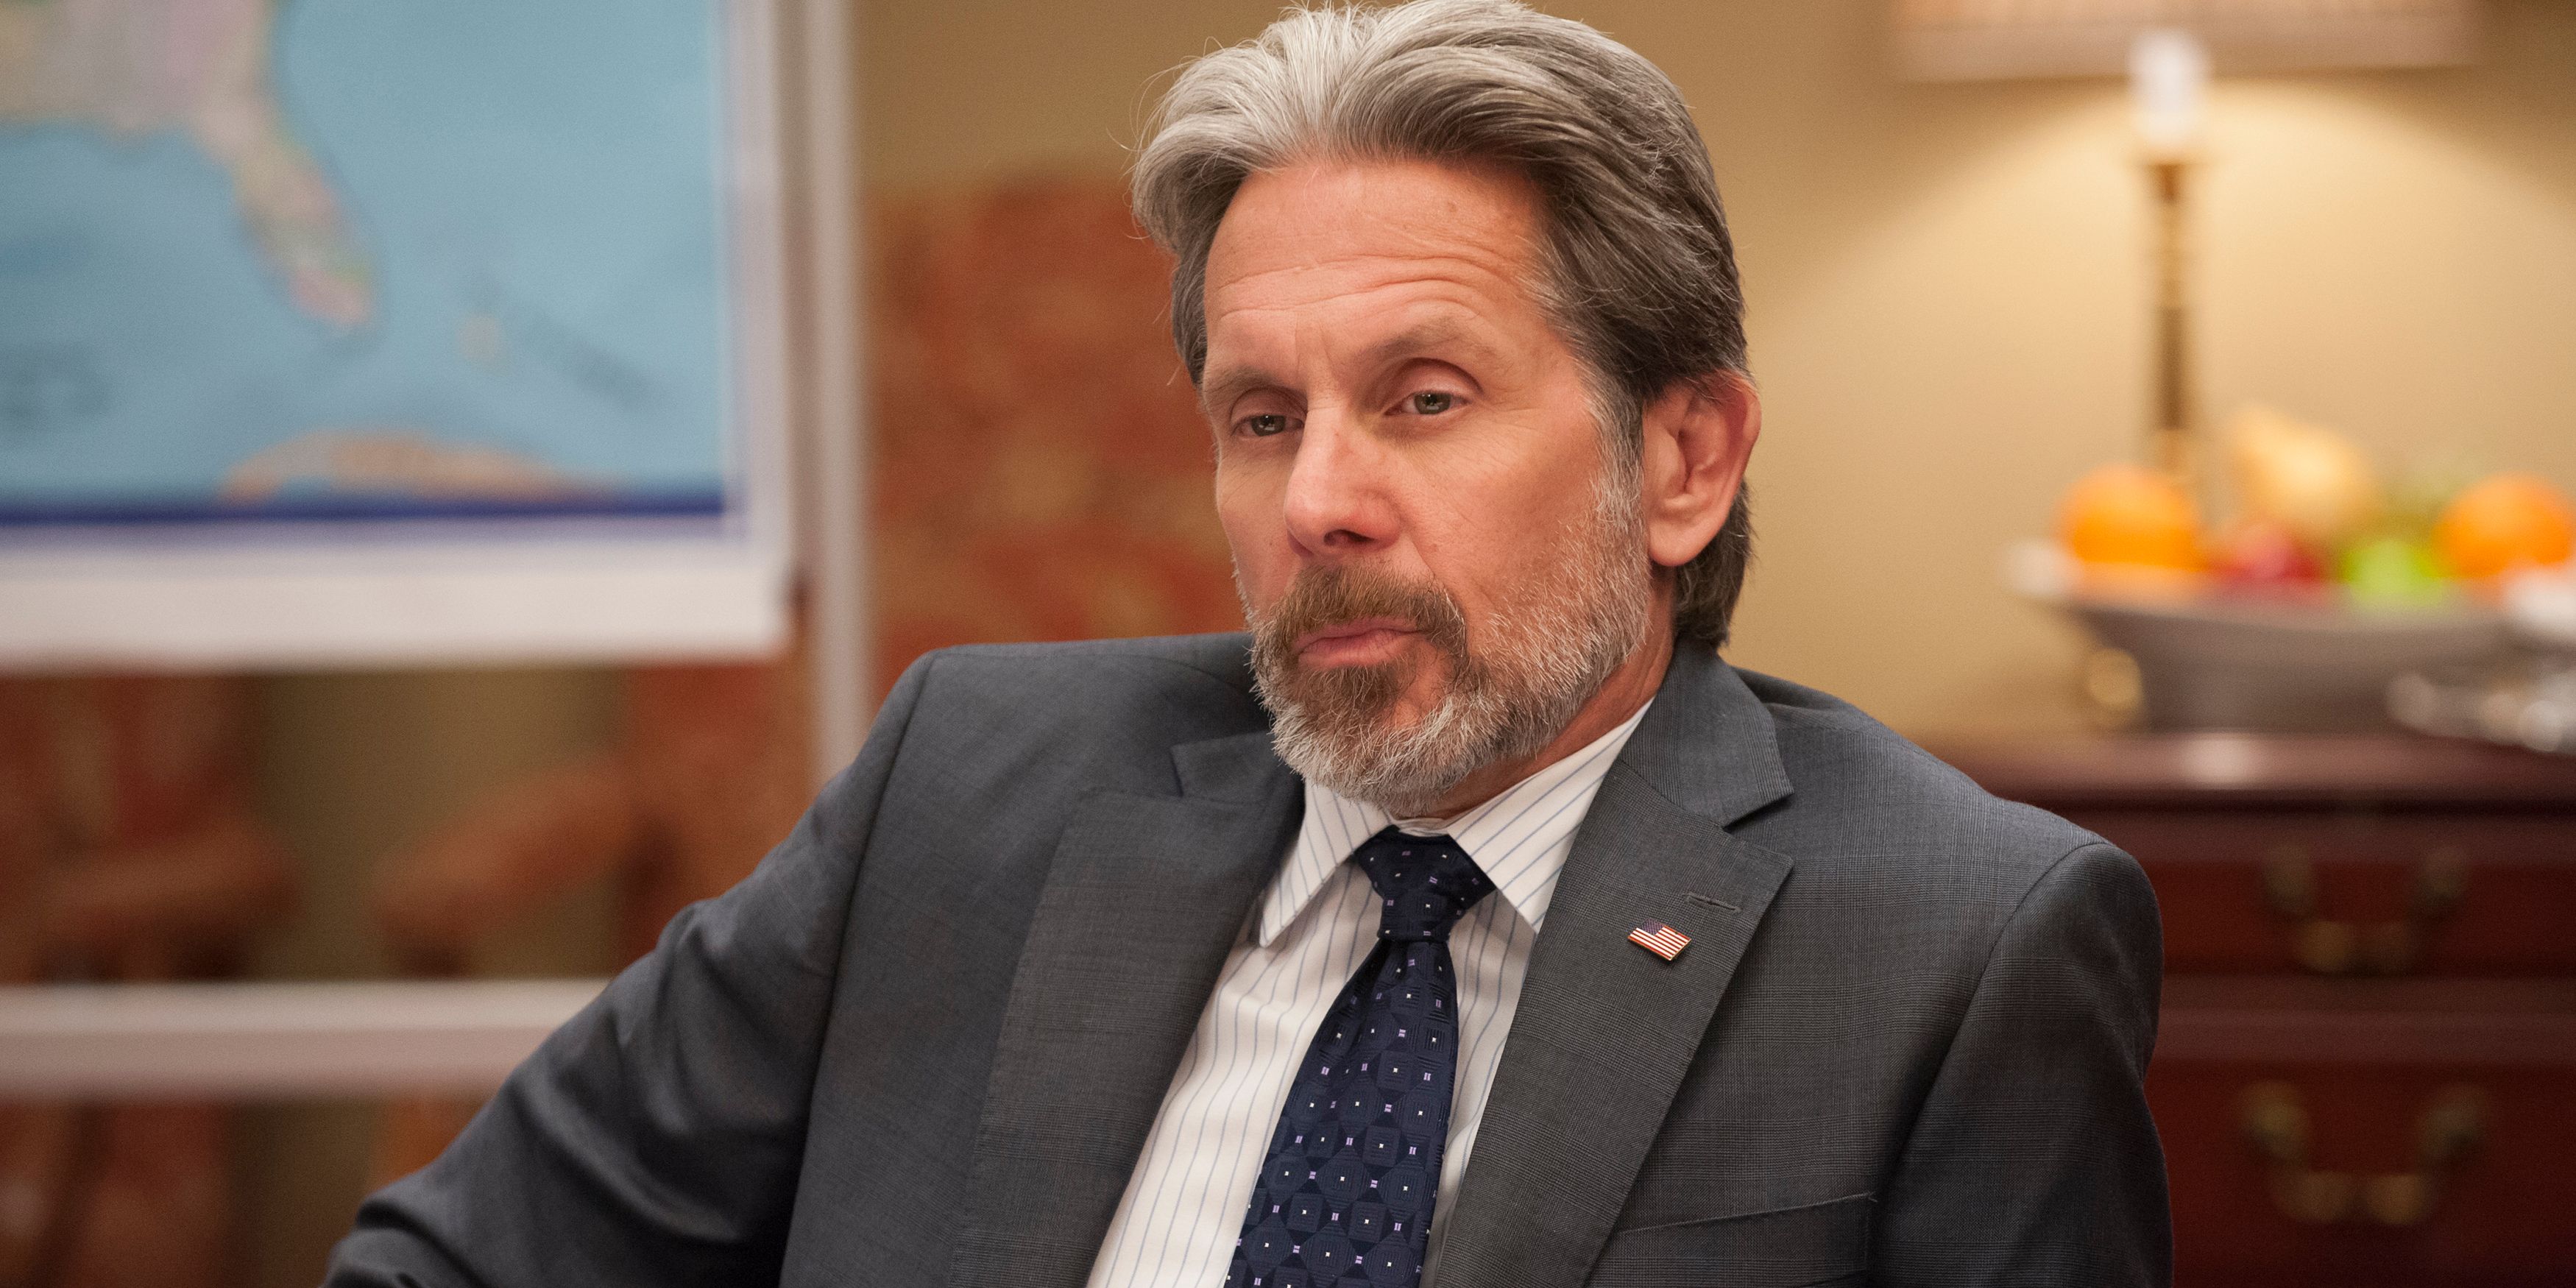 Vice President Kent Davidson (Gary Cole) smugly leaning in a chair from Veep